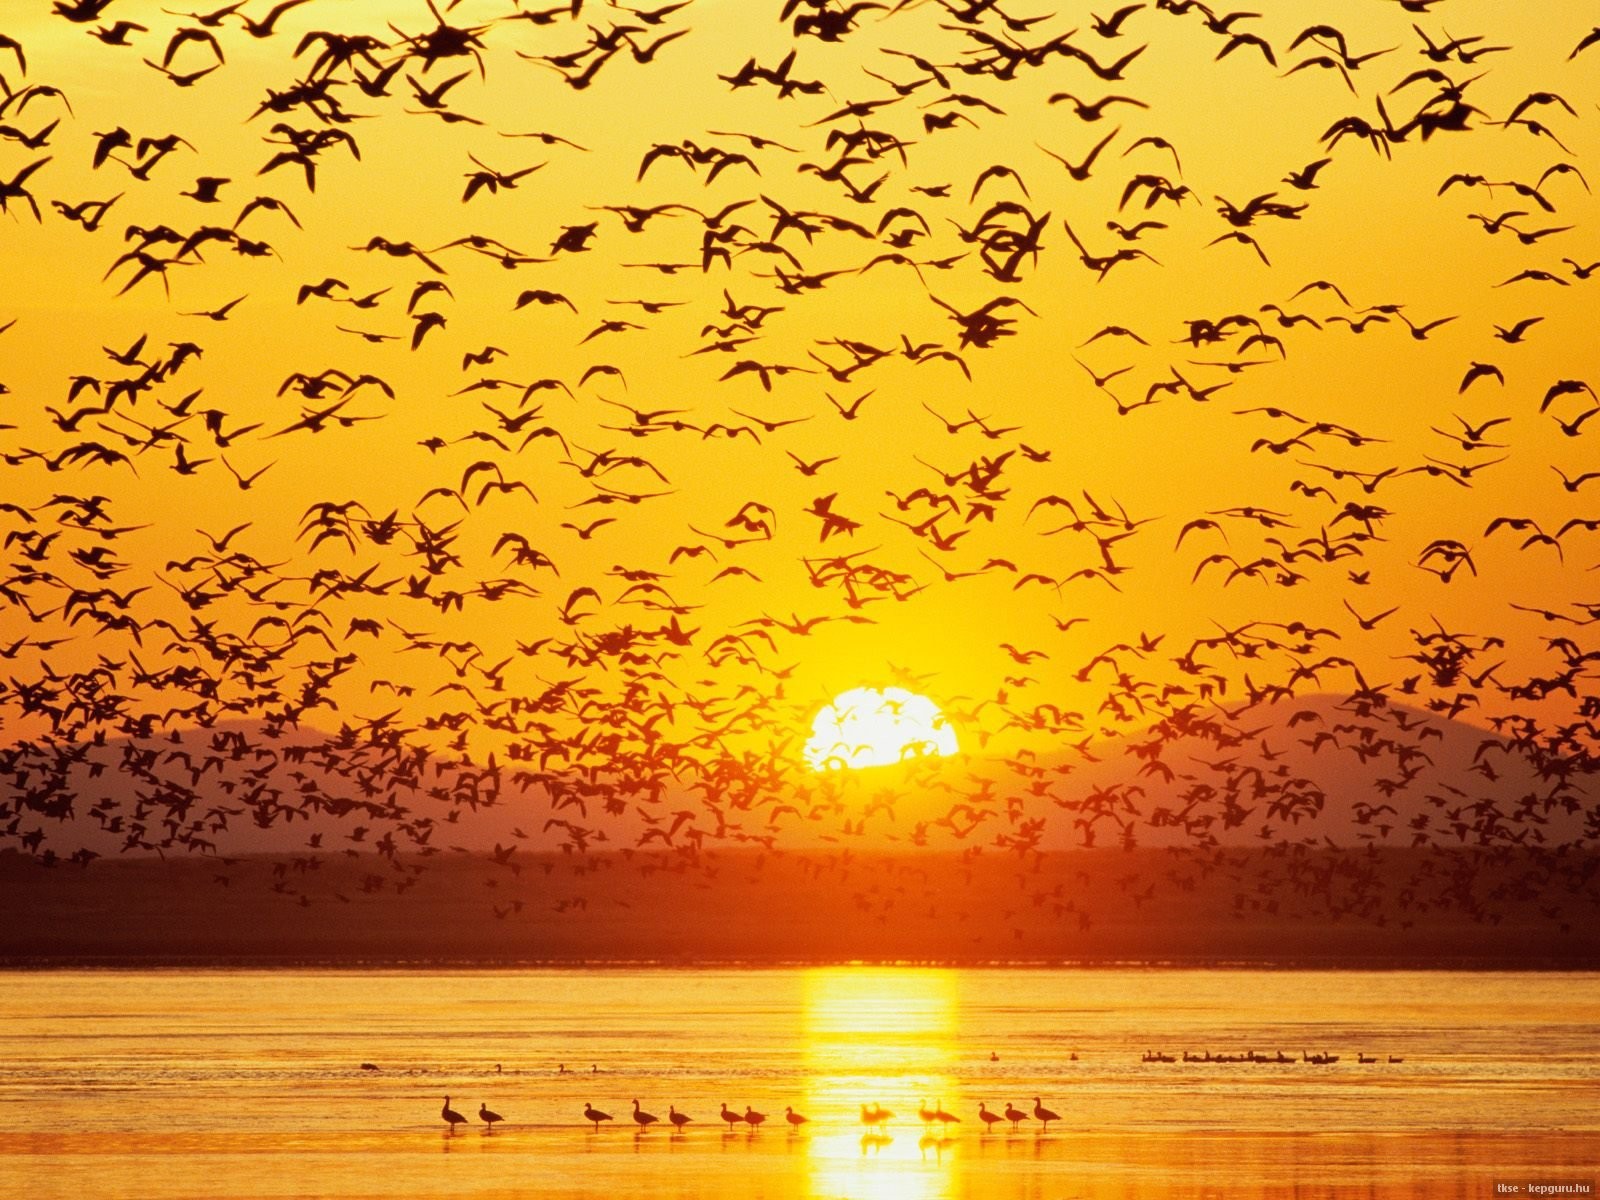 A Large Flock Of Geese On A Lake At Sunset Wallpapers And Images